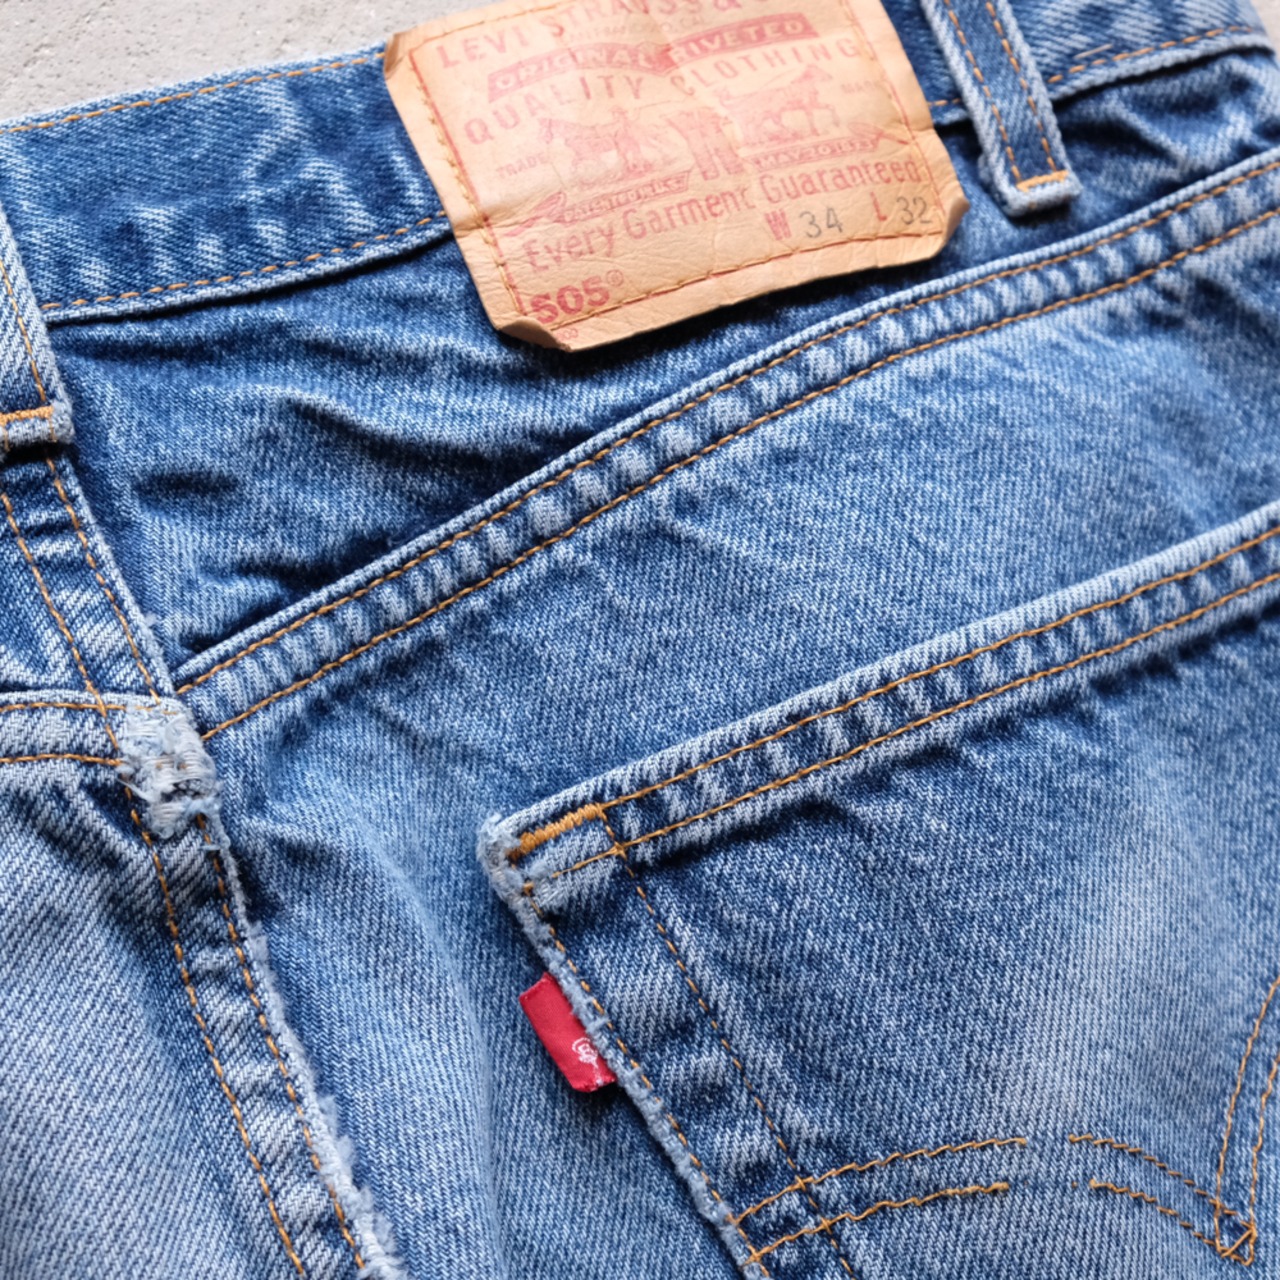 Levi's 505 Made in USA